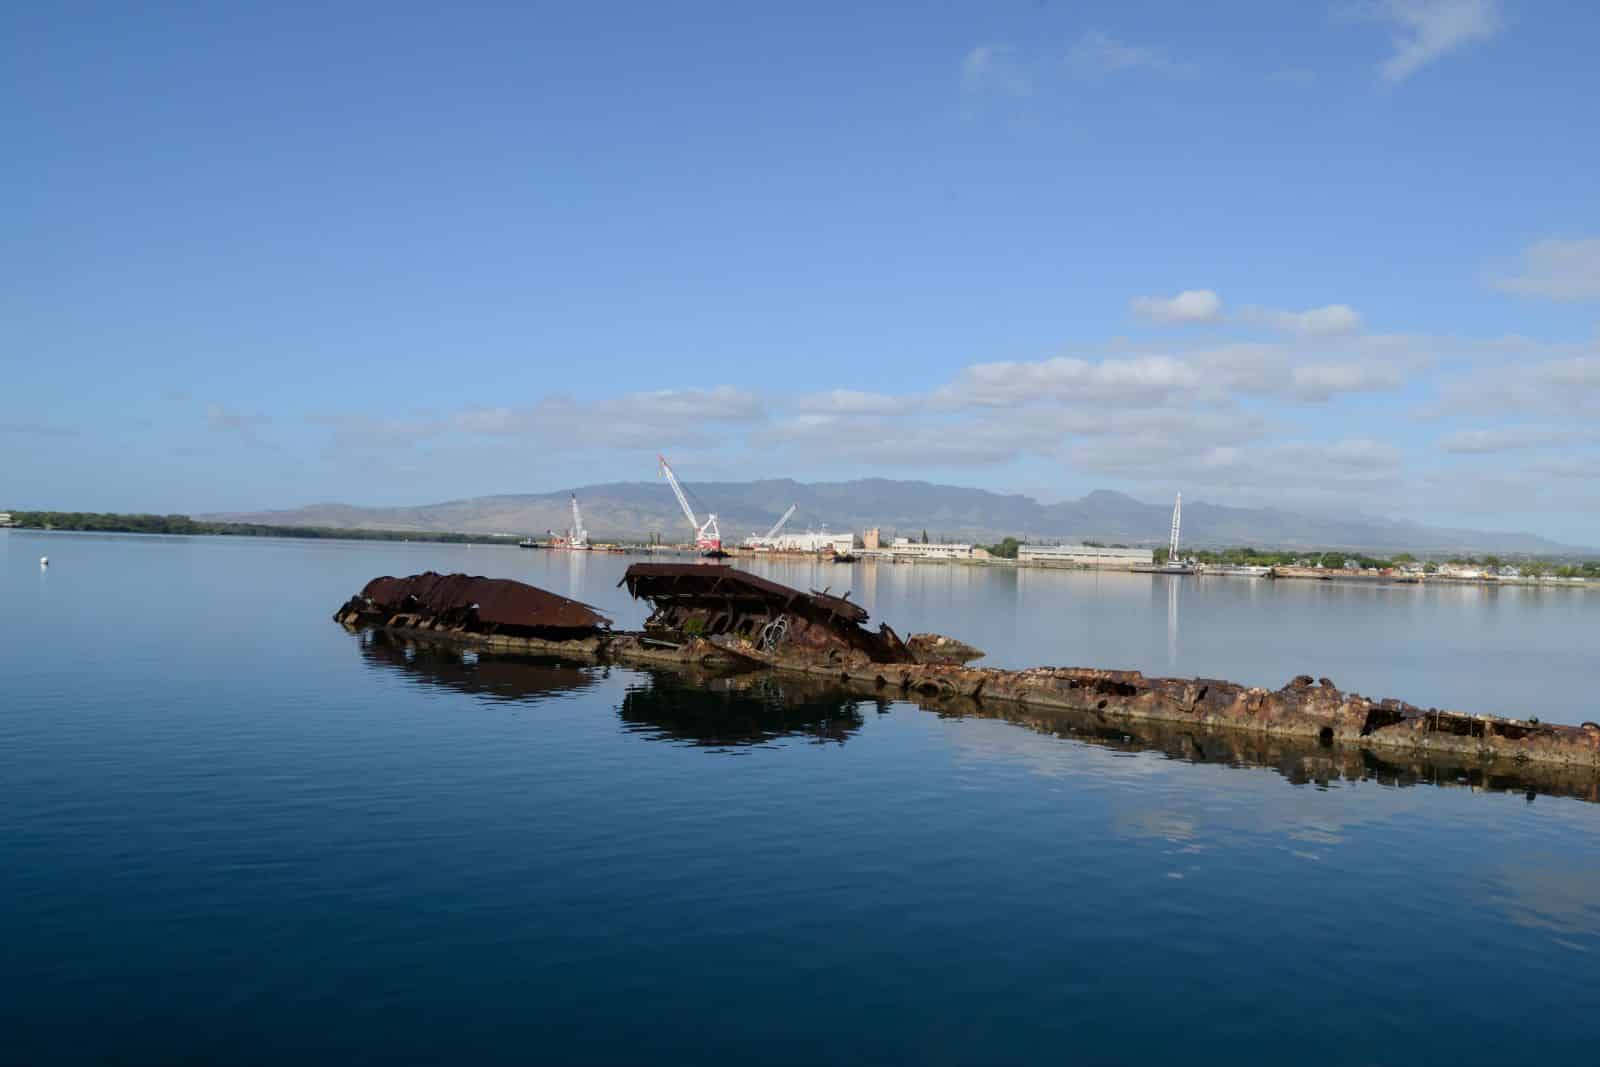 Image credit: Shutterstock / Cucumber Key Photography <p>Visit the lesser-known USS Utah, another battleship that was sunk during the attack, now memorialized on the opposite side of Ford Island.</p>